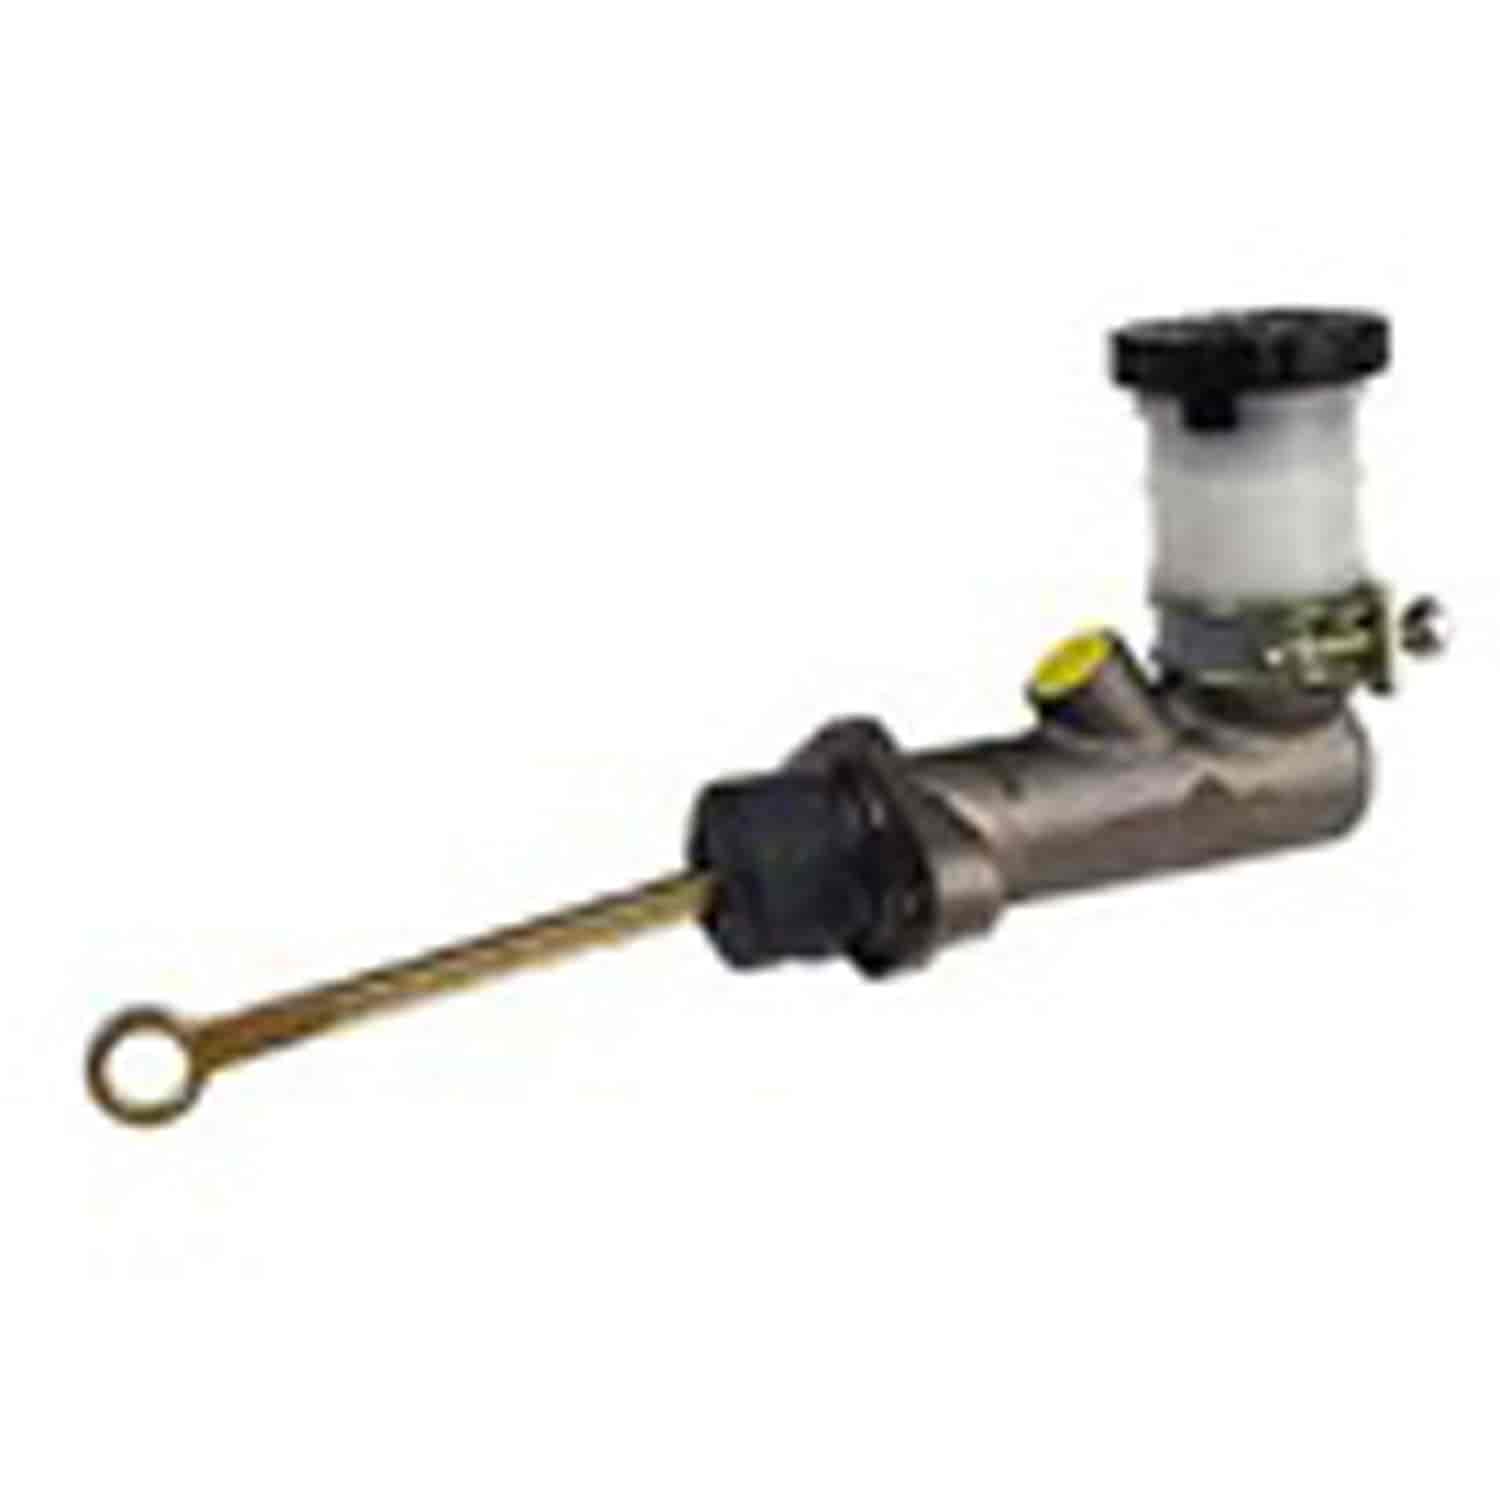 Replacement clutch master cylinder from Omix-ADA, Fits 84-85 Jeep Cherokee XJ